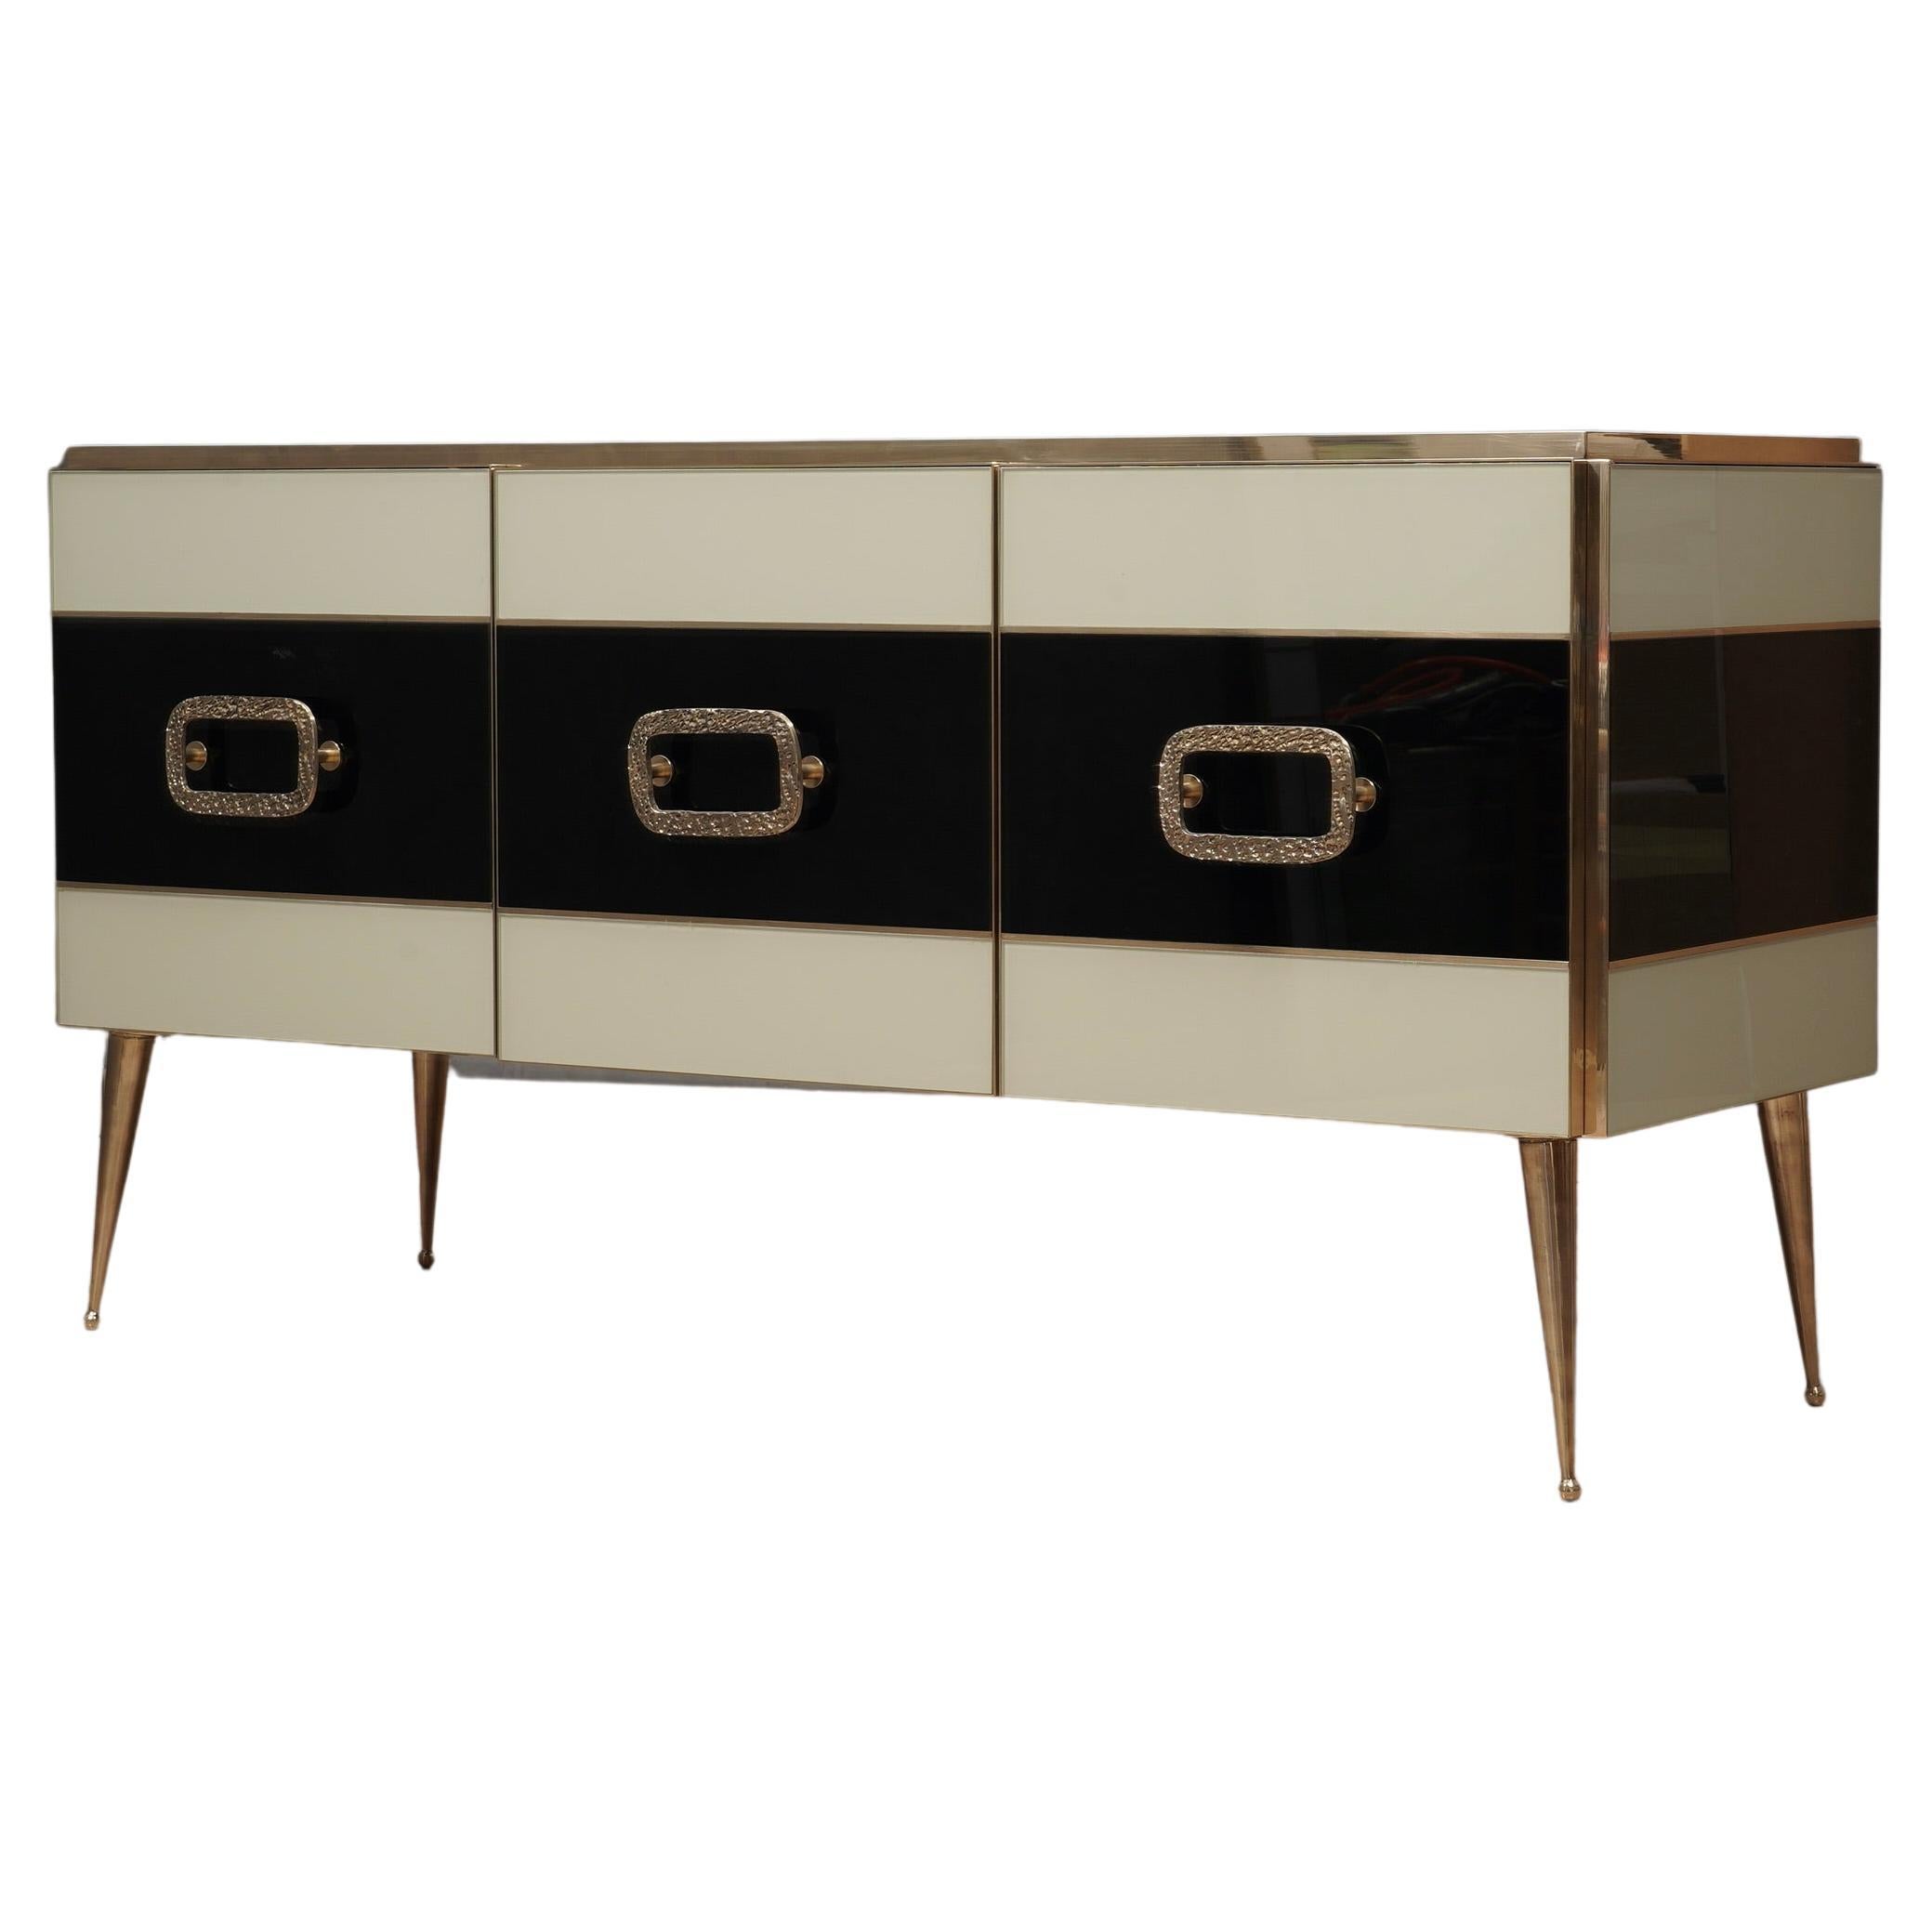 MidCentury Inspired Glass and Brass Italian Sideboard, 2000 For Sale